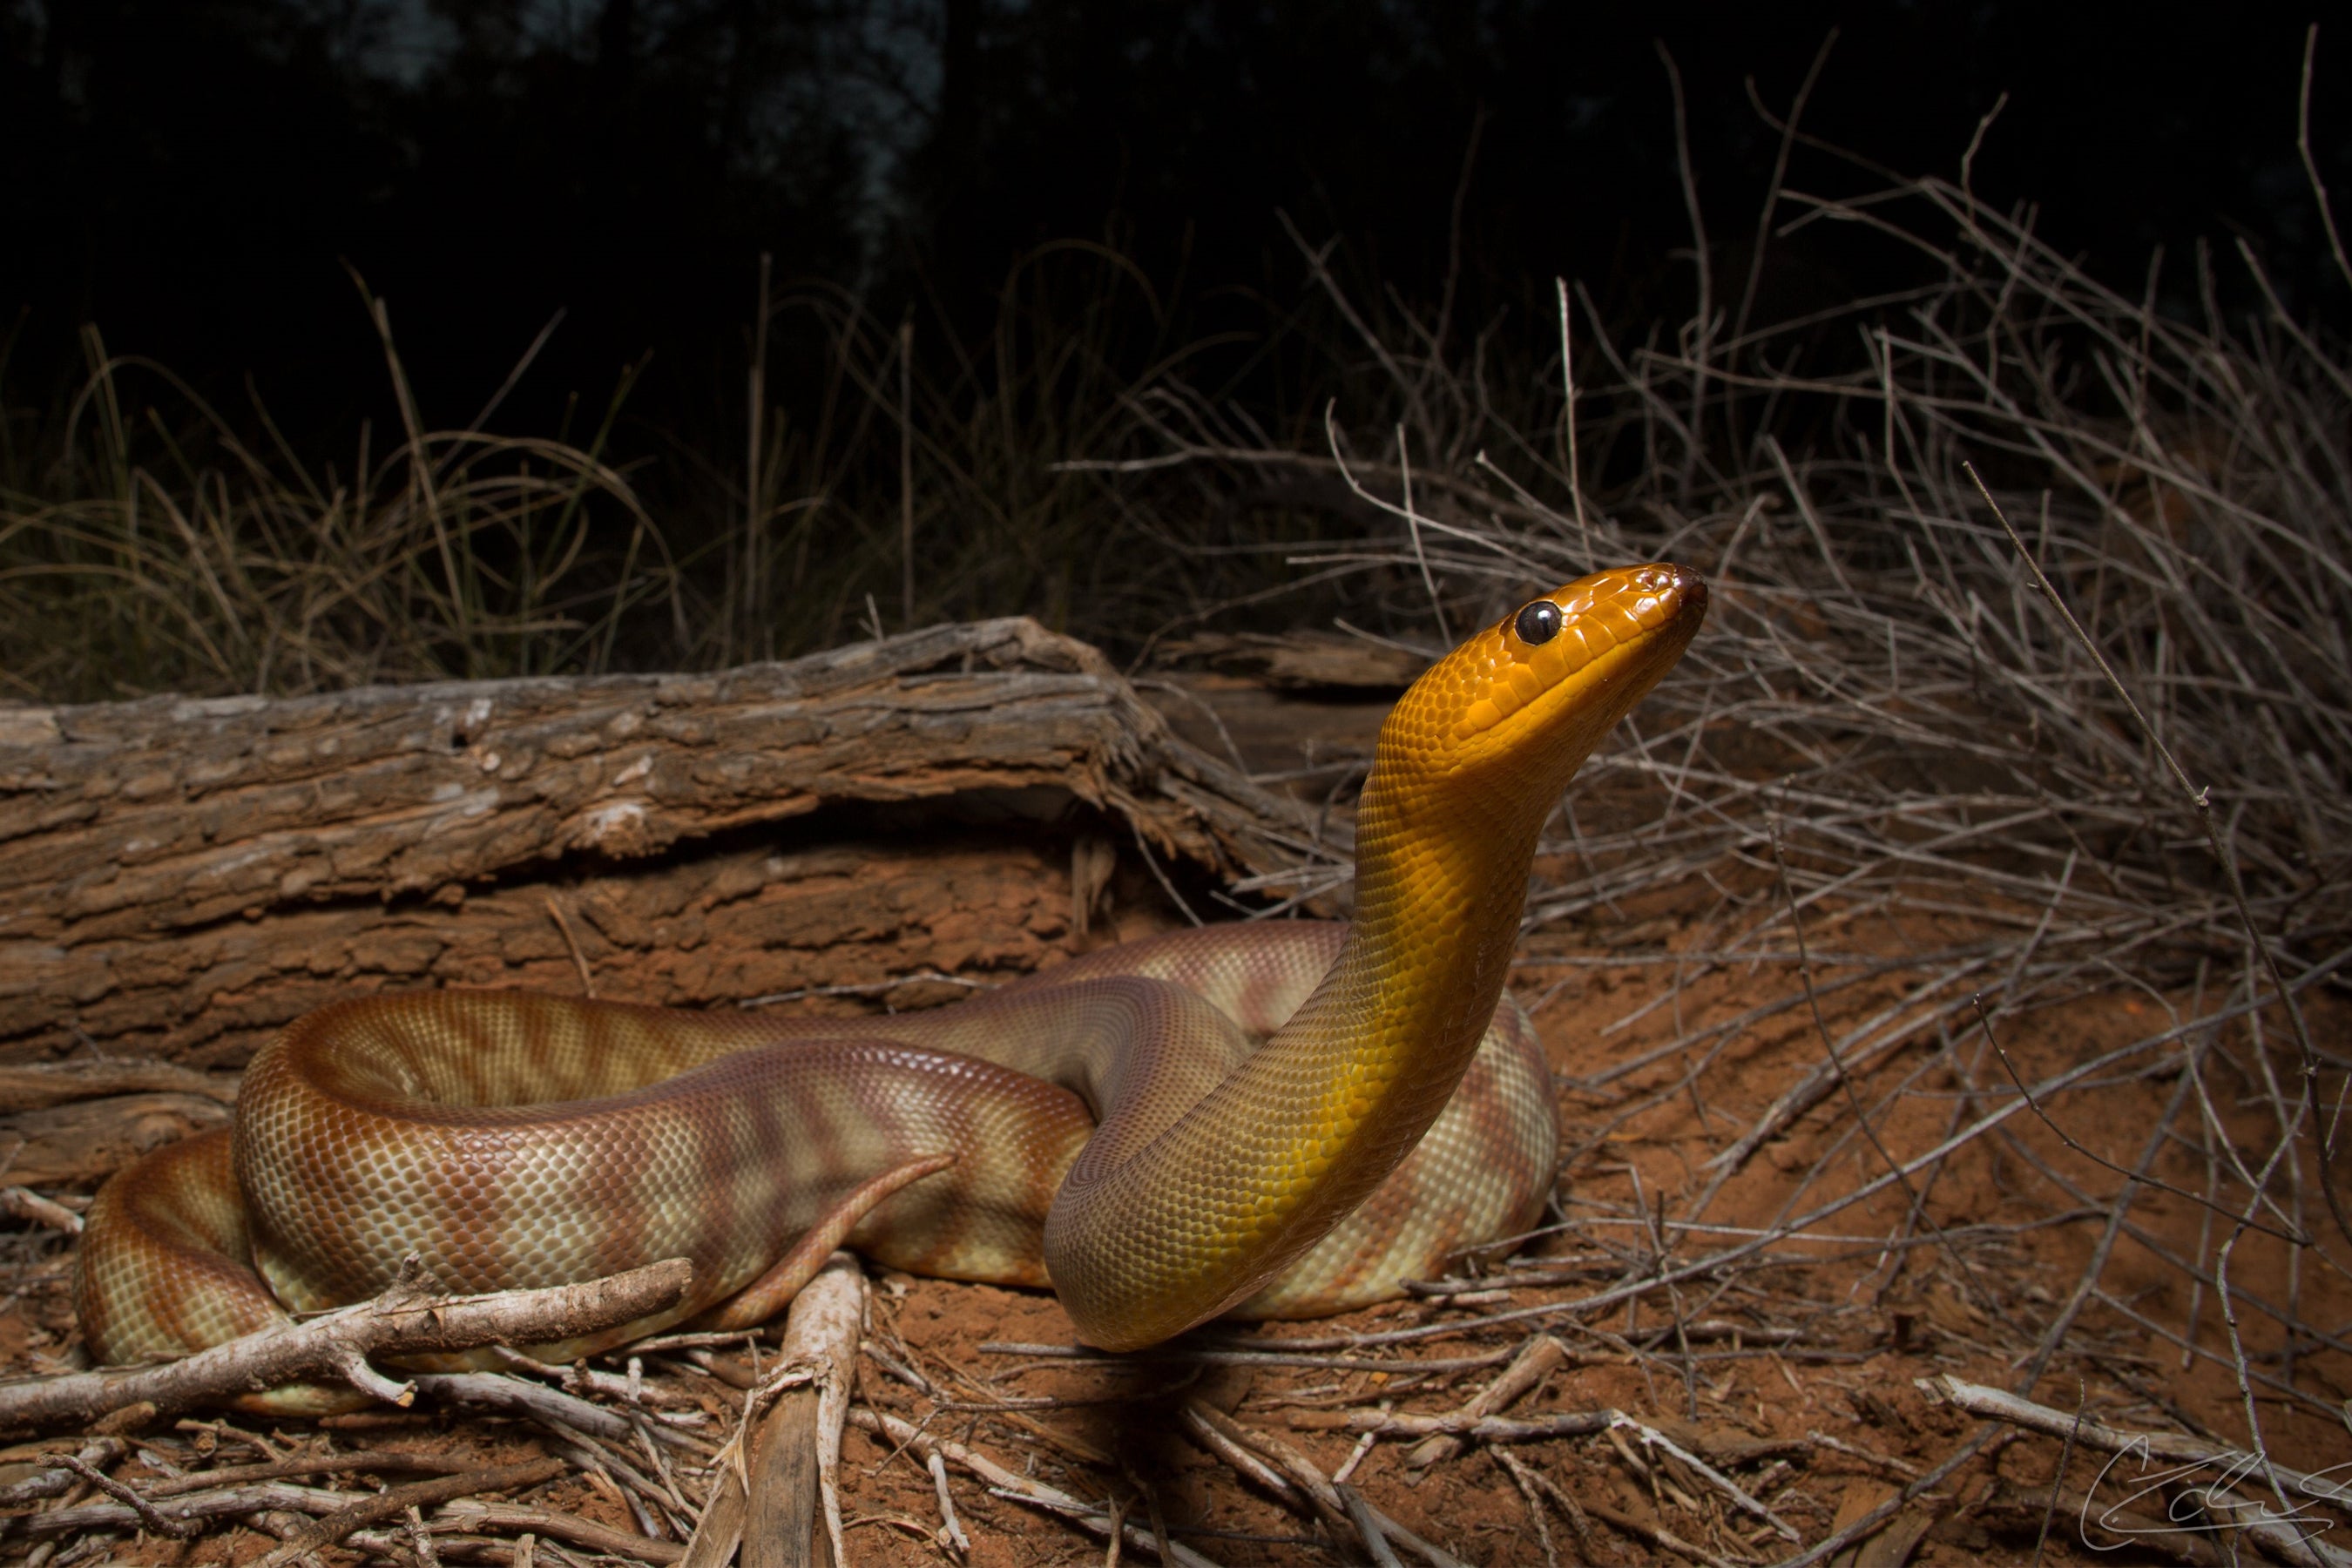 Snakes Can Hear You Scream, New Research Reveals